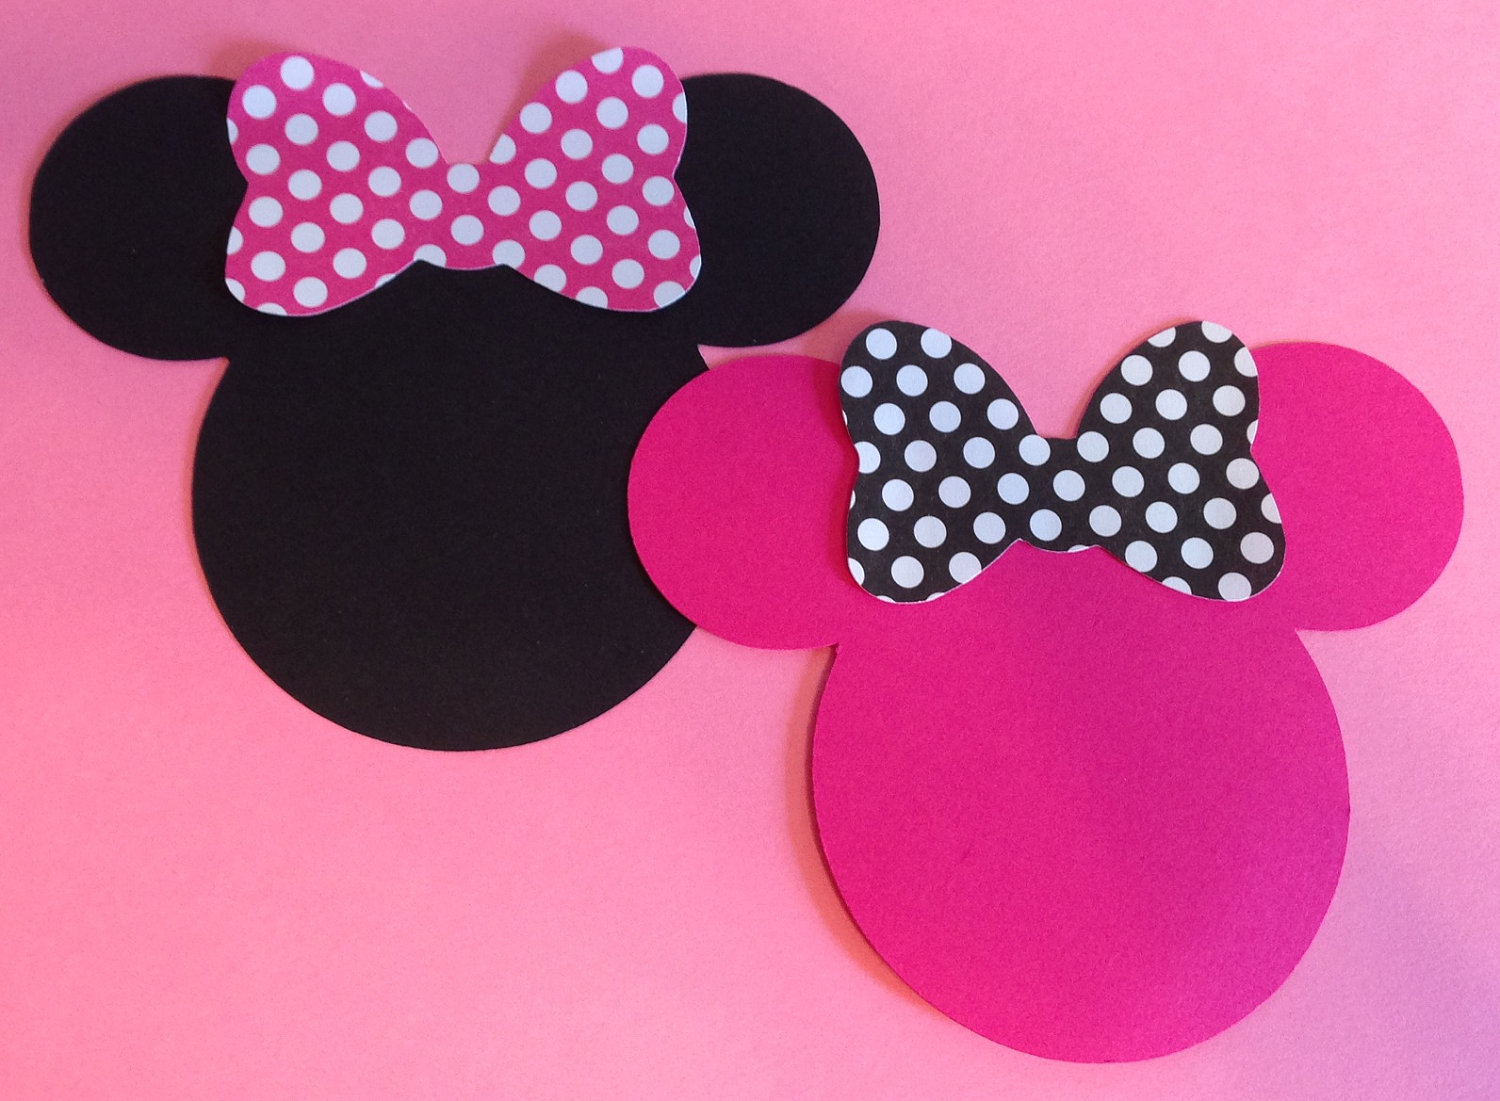 Popular items for minnie mouse head on Etsy